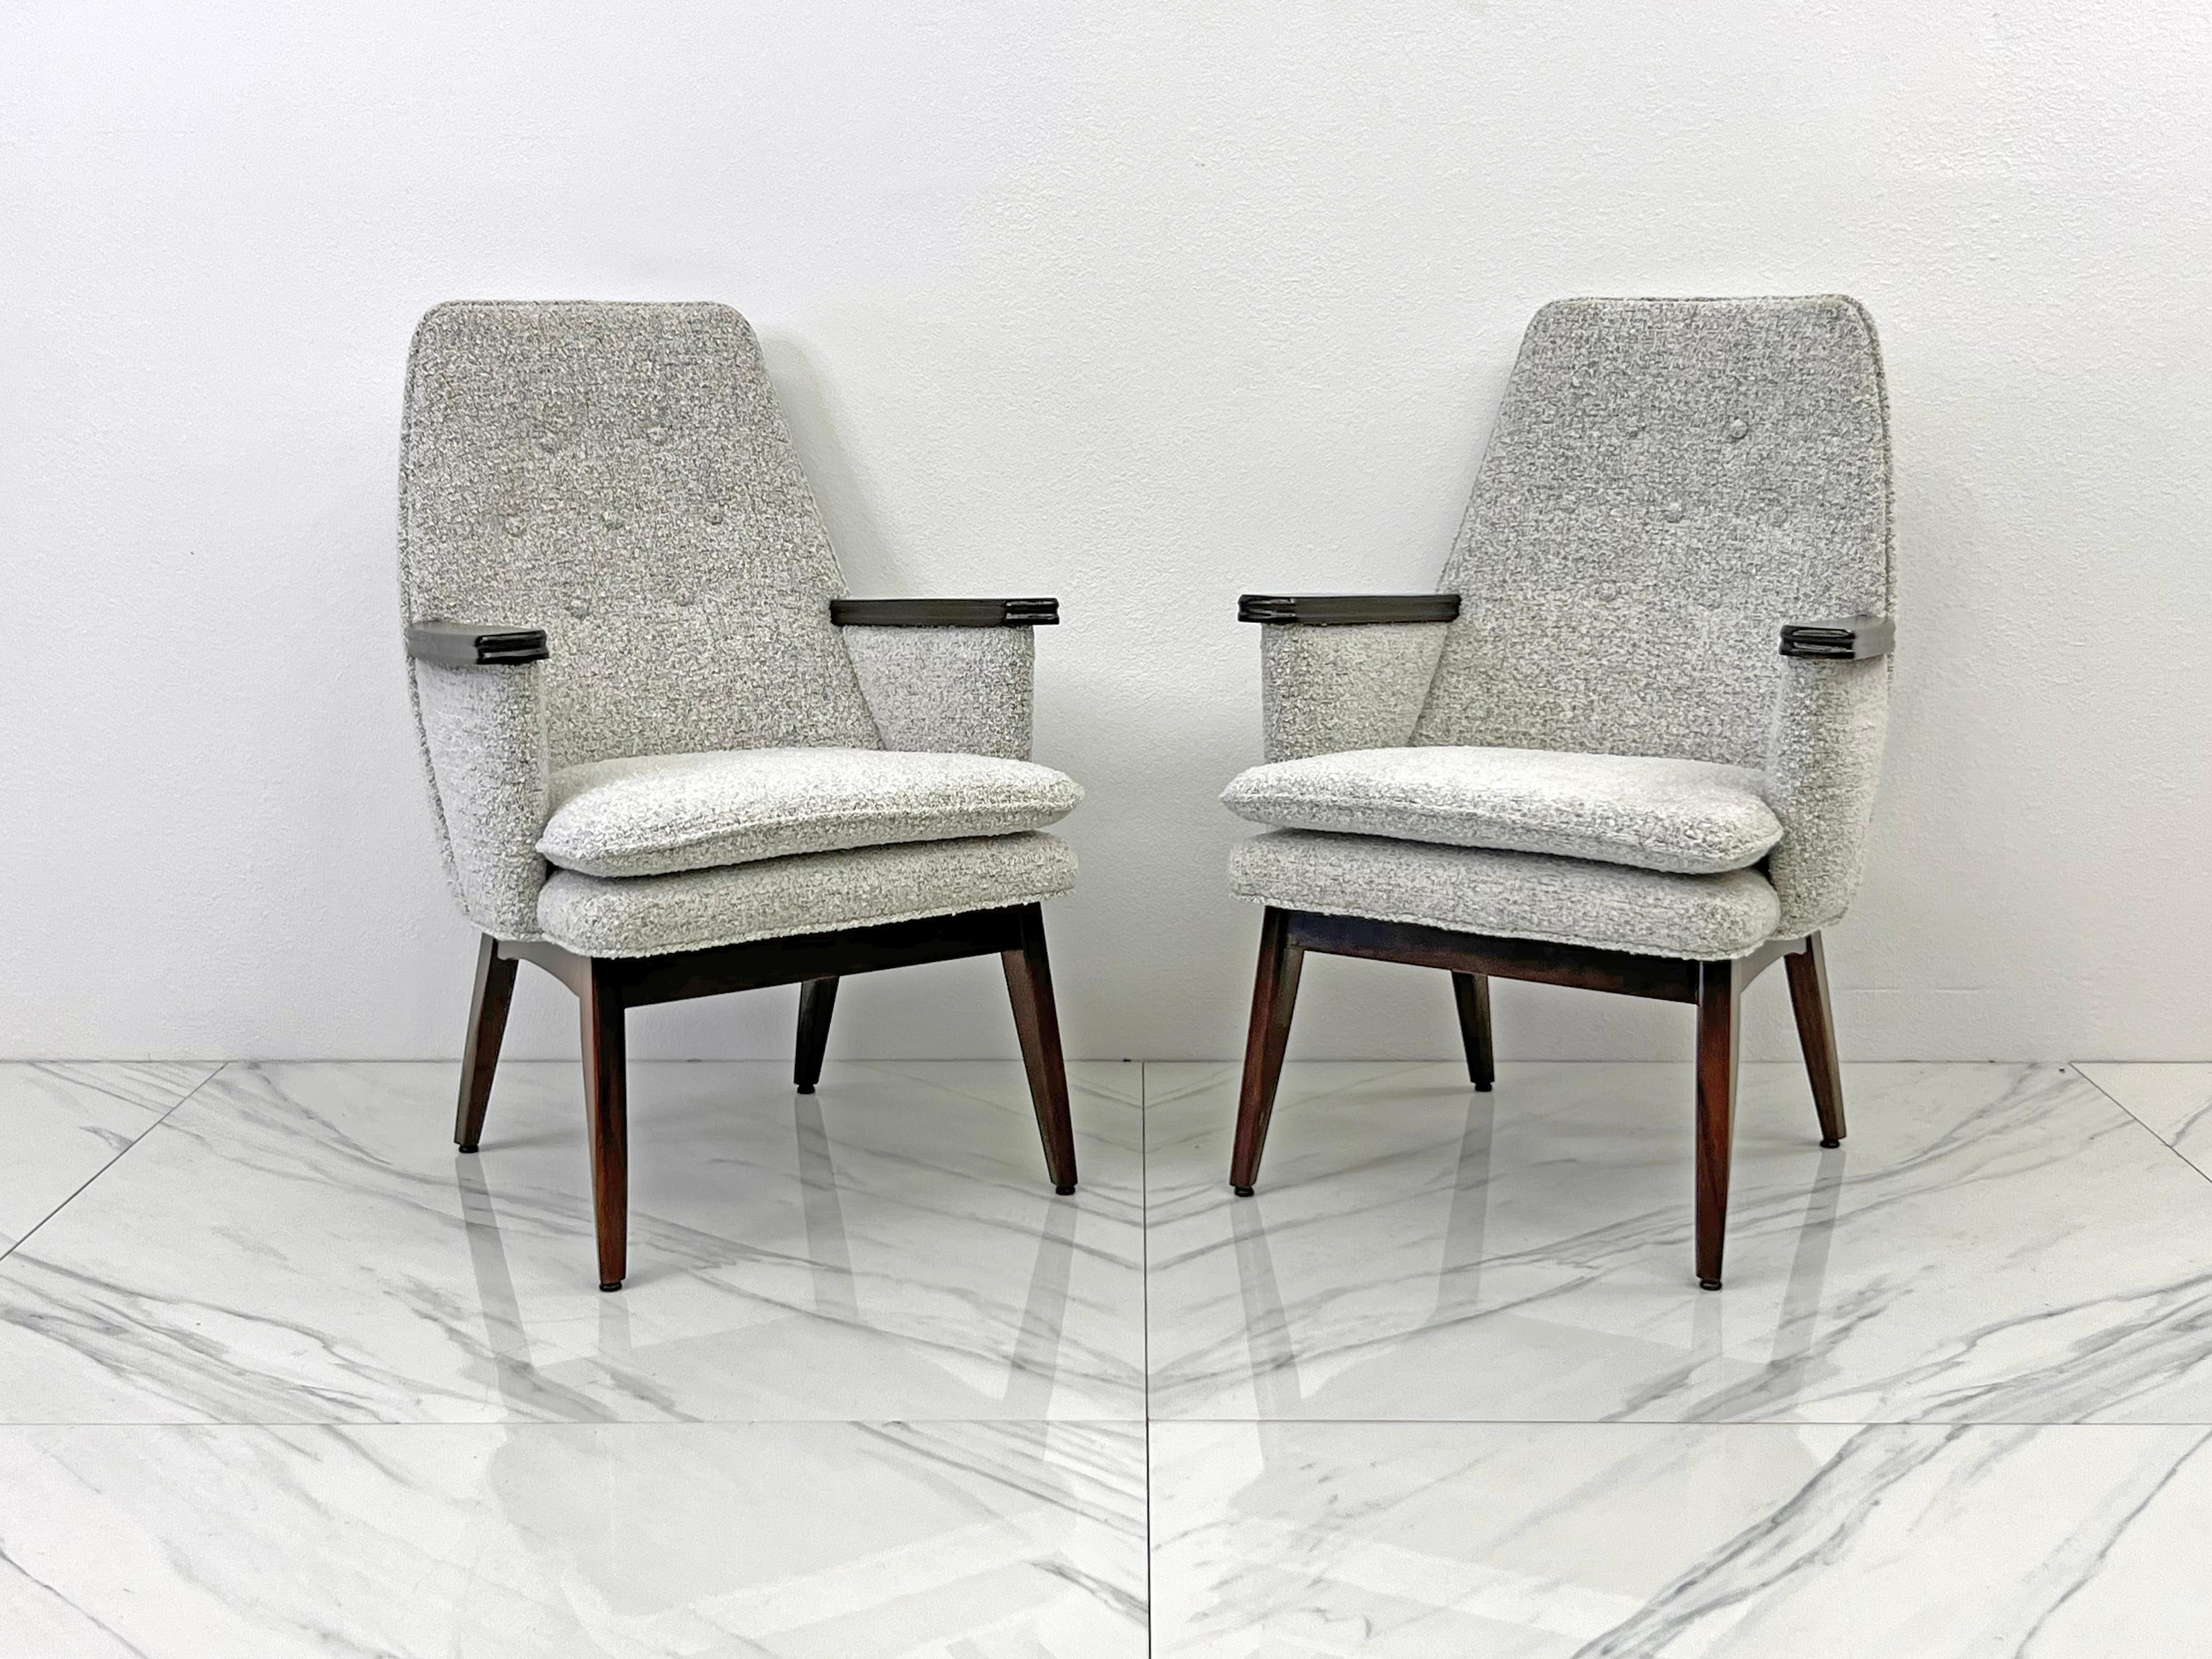 Meet these enchanting mid-century modern chairs, the epitome of sophistication with a sprinkle of whimsy. Dating back to the 1960s, these gorgeous chairs have been given a chic makeover, making them an absolute must-have for anyone with an eye for